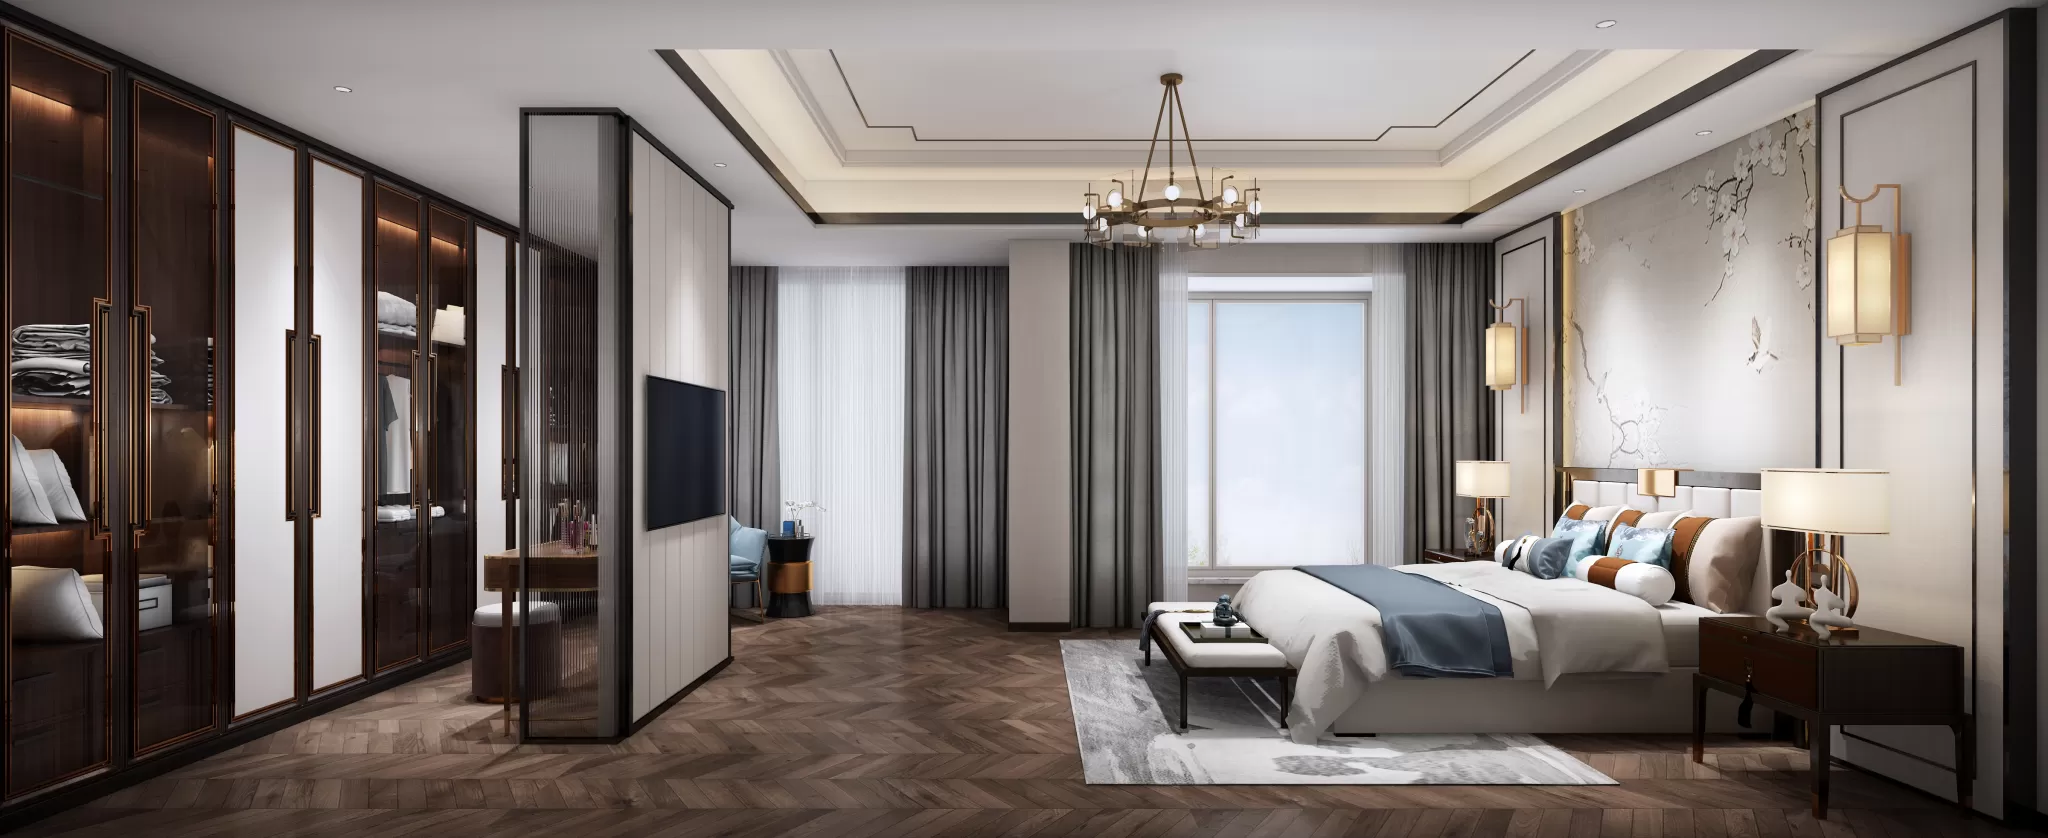 DESMOD INTERIOR 2021 (VRAY)/5. BEDROOM – 2. CHINESE STYLES – 161